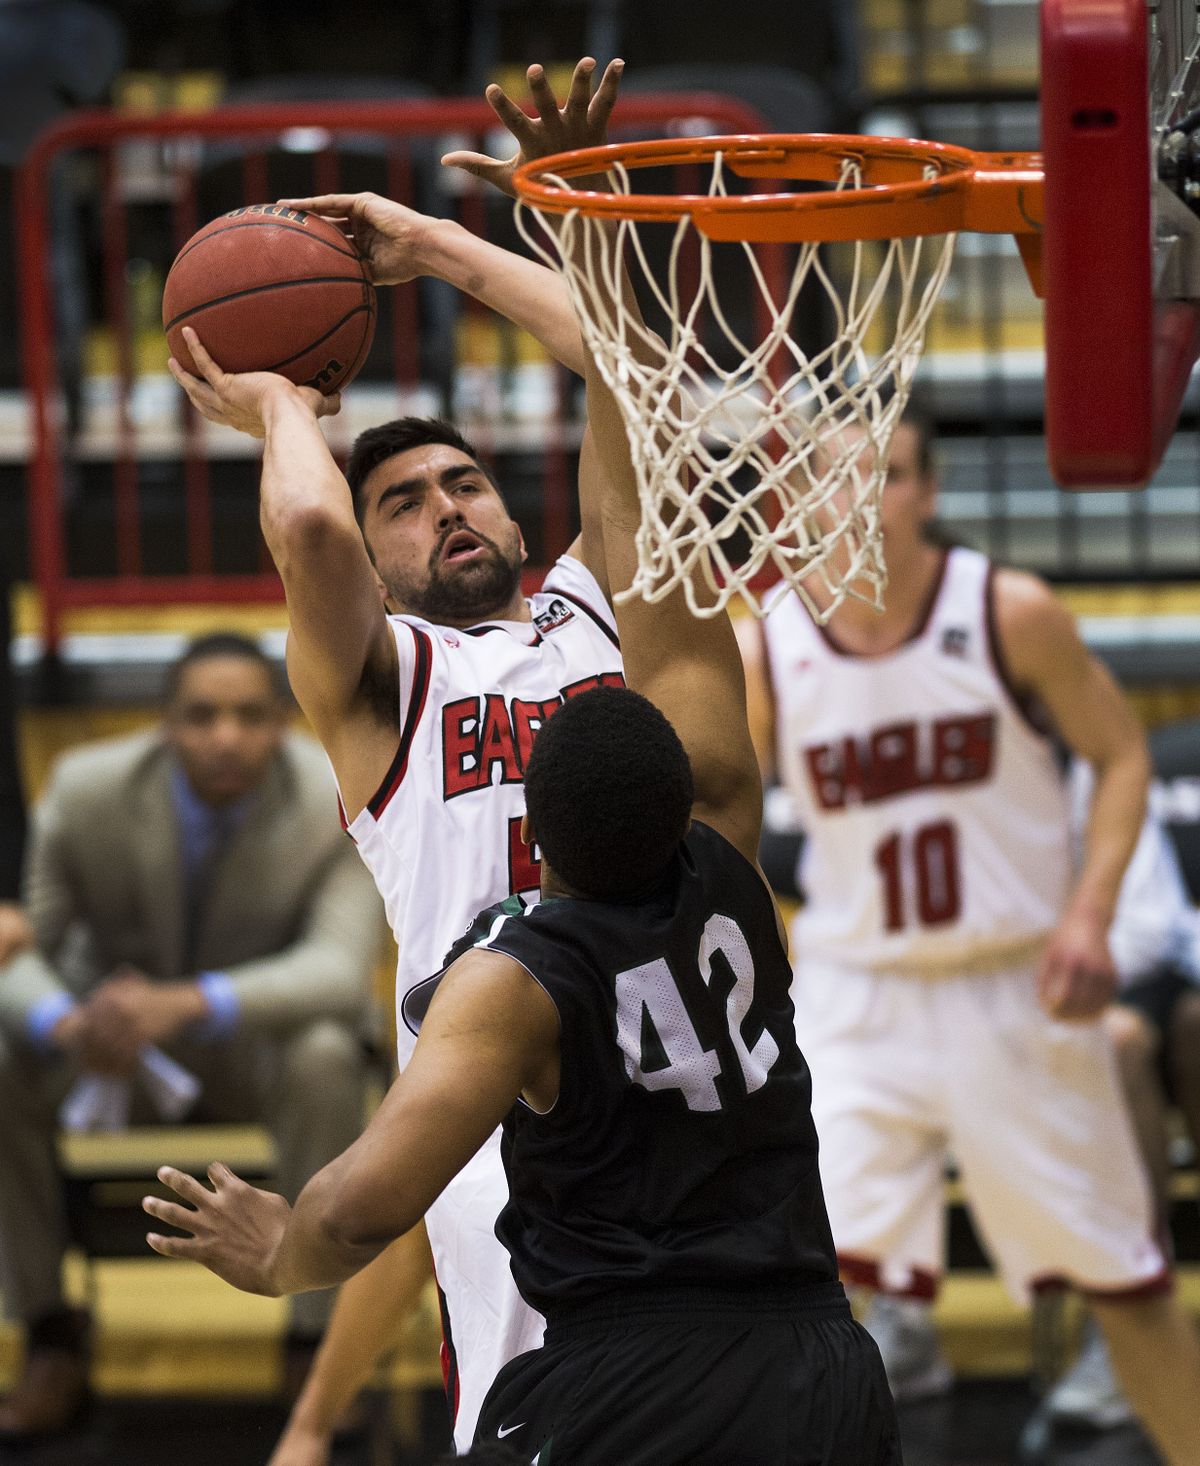 Junior power forward Venky Jois will be counted on to be a force in the middle for Eastern Washington. (Colin Mulvany)